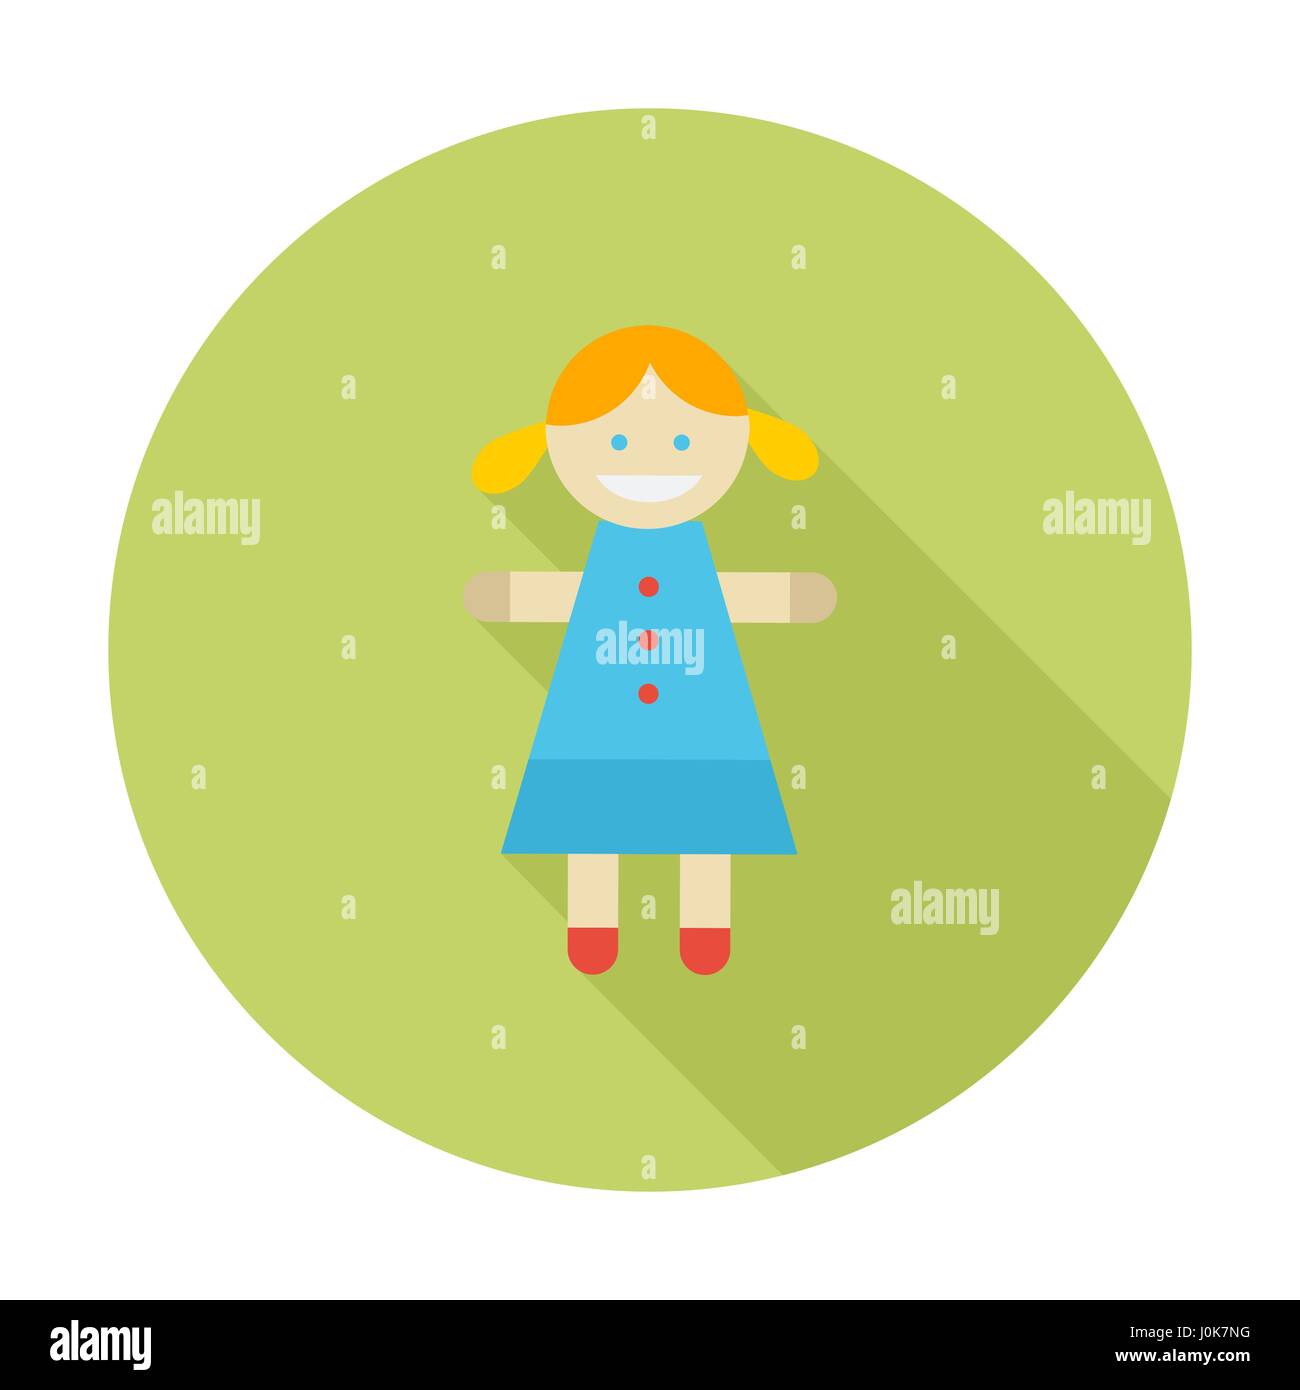 Doll toy icon. Flat vector related icon with long shadow for web and mobile applications. It can be used as - logo, pictogram, icon, infographic eleme Stock Vector